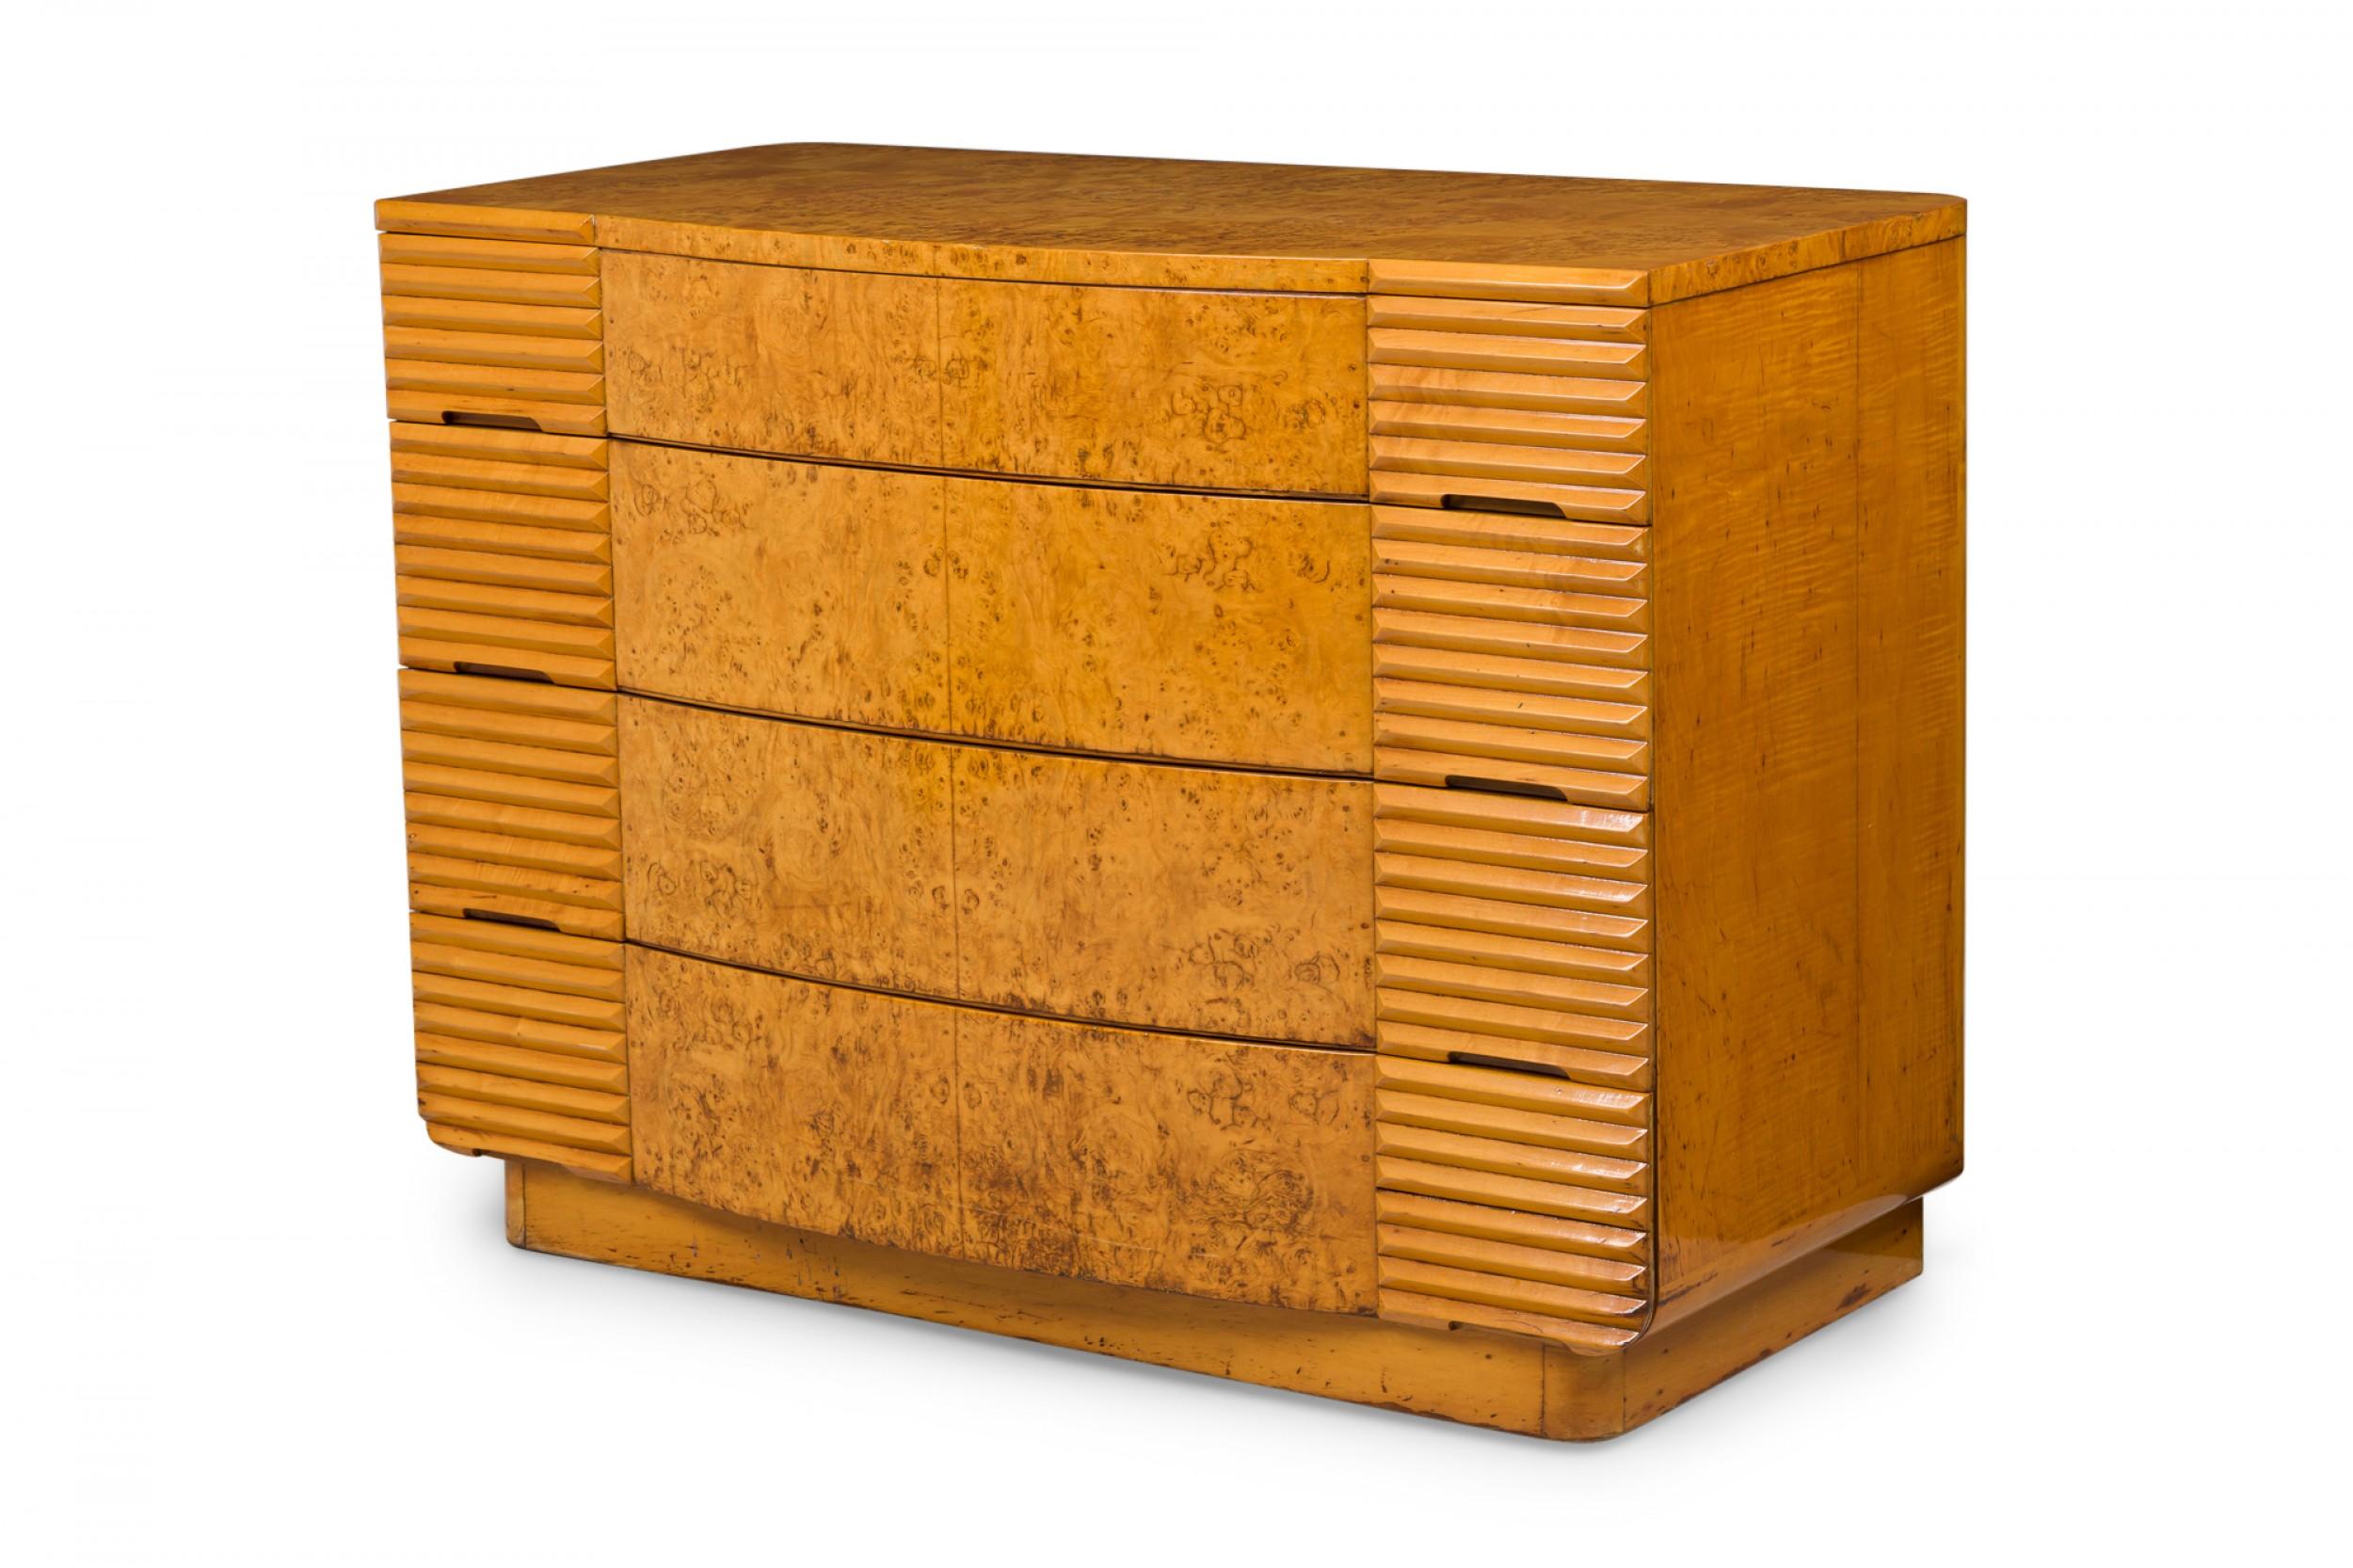 American Art Deco burled birch veneer and bleached walnut chest containing four drawers with central curved fronts and decoratively louvered sections on either side. (manner of DONALD DESKEY)